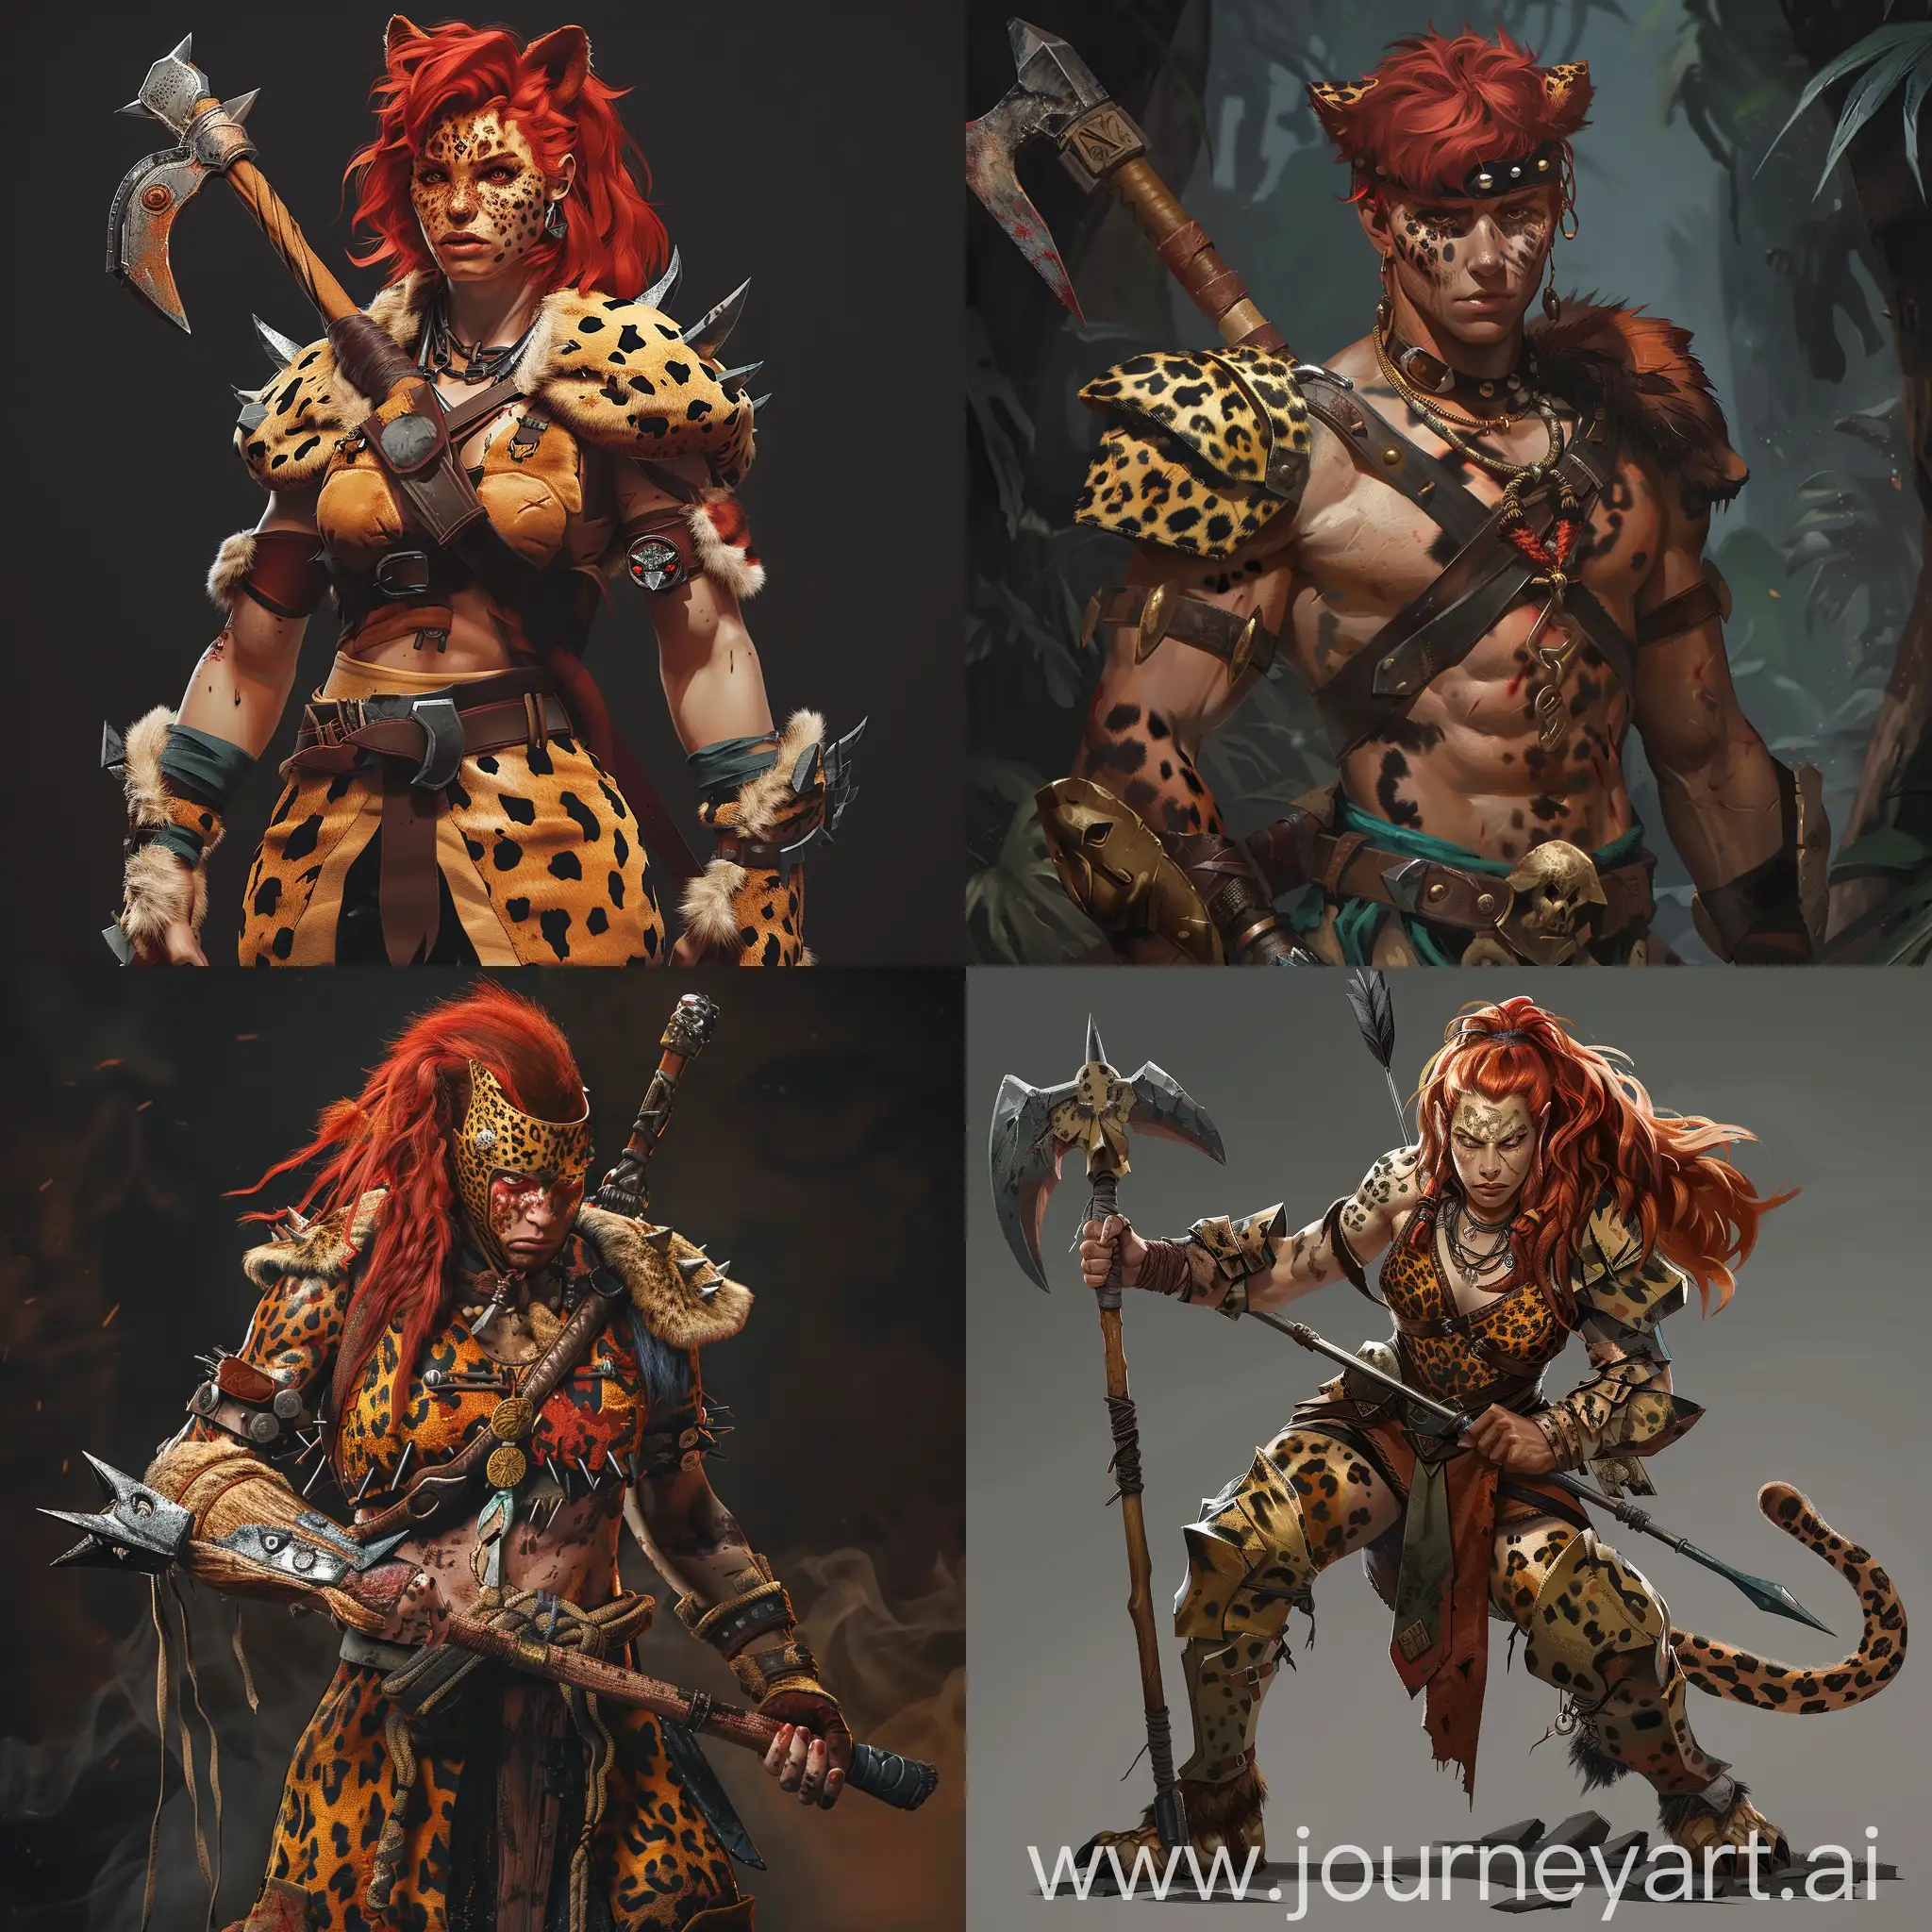 RedHaired-Warrior-in-Leopard-Armor-with-Intimidating-Melee-Weapon